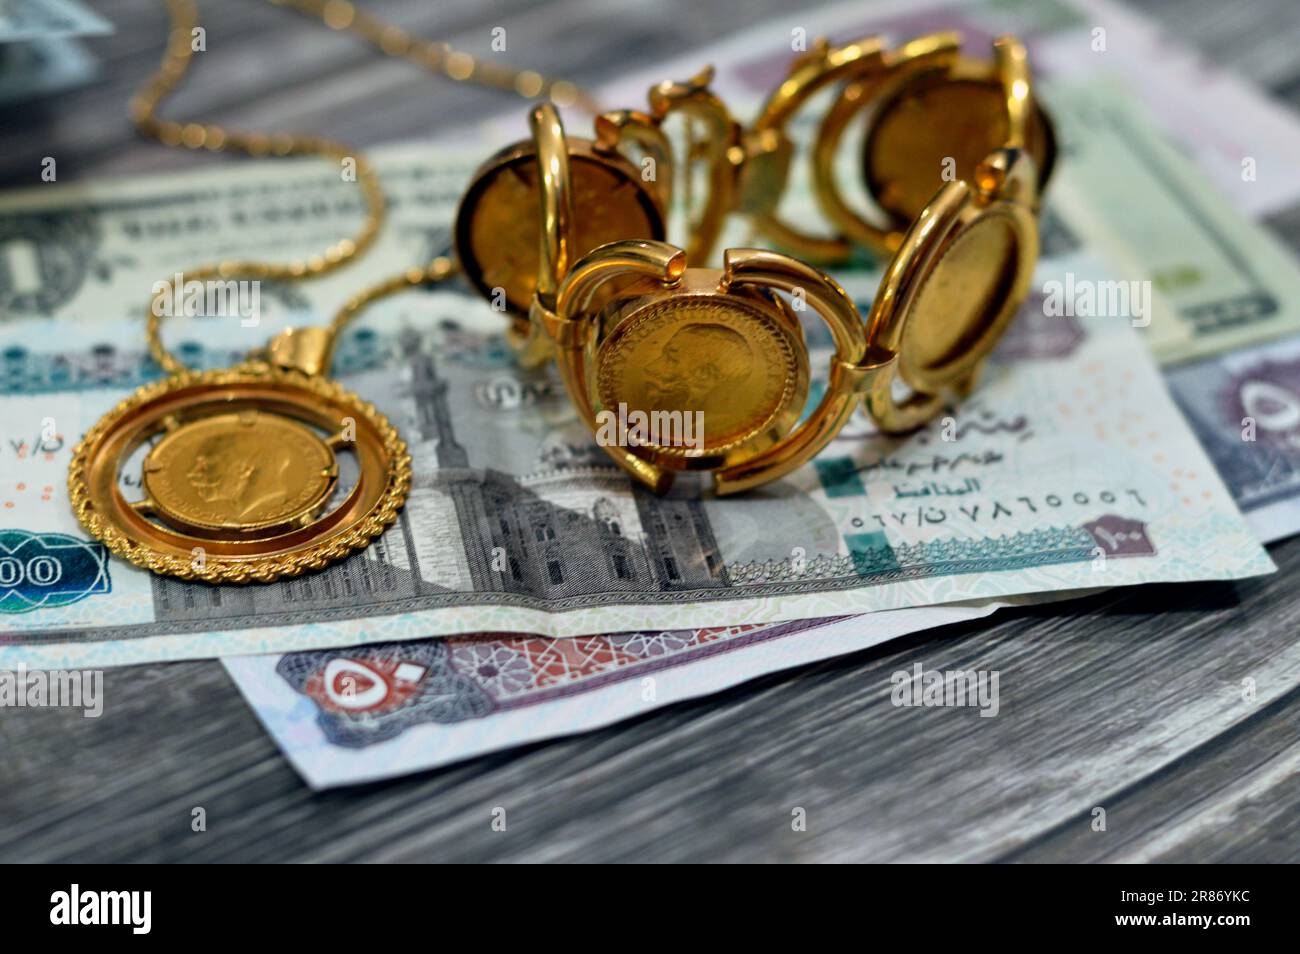 American dollars, Egyptian pounds and Saudi Arabia Riyals banknotes currency bills money with sovereign British gold coins shapes bullion coin feature Stock Photo